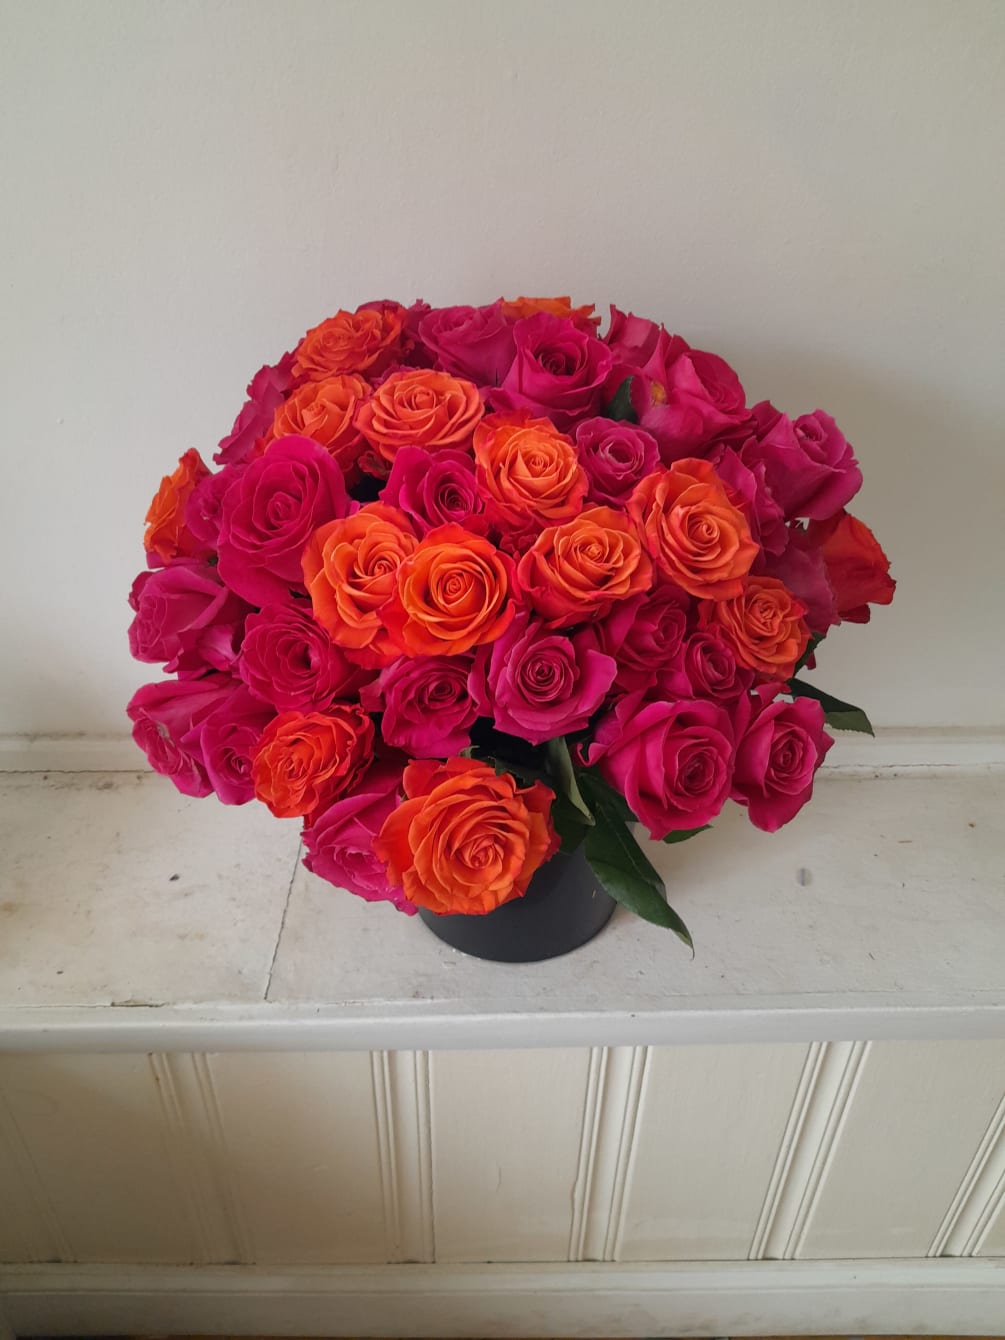 Beautiful hot pink Pink Floid roses mixed with some orange roses in